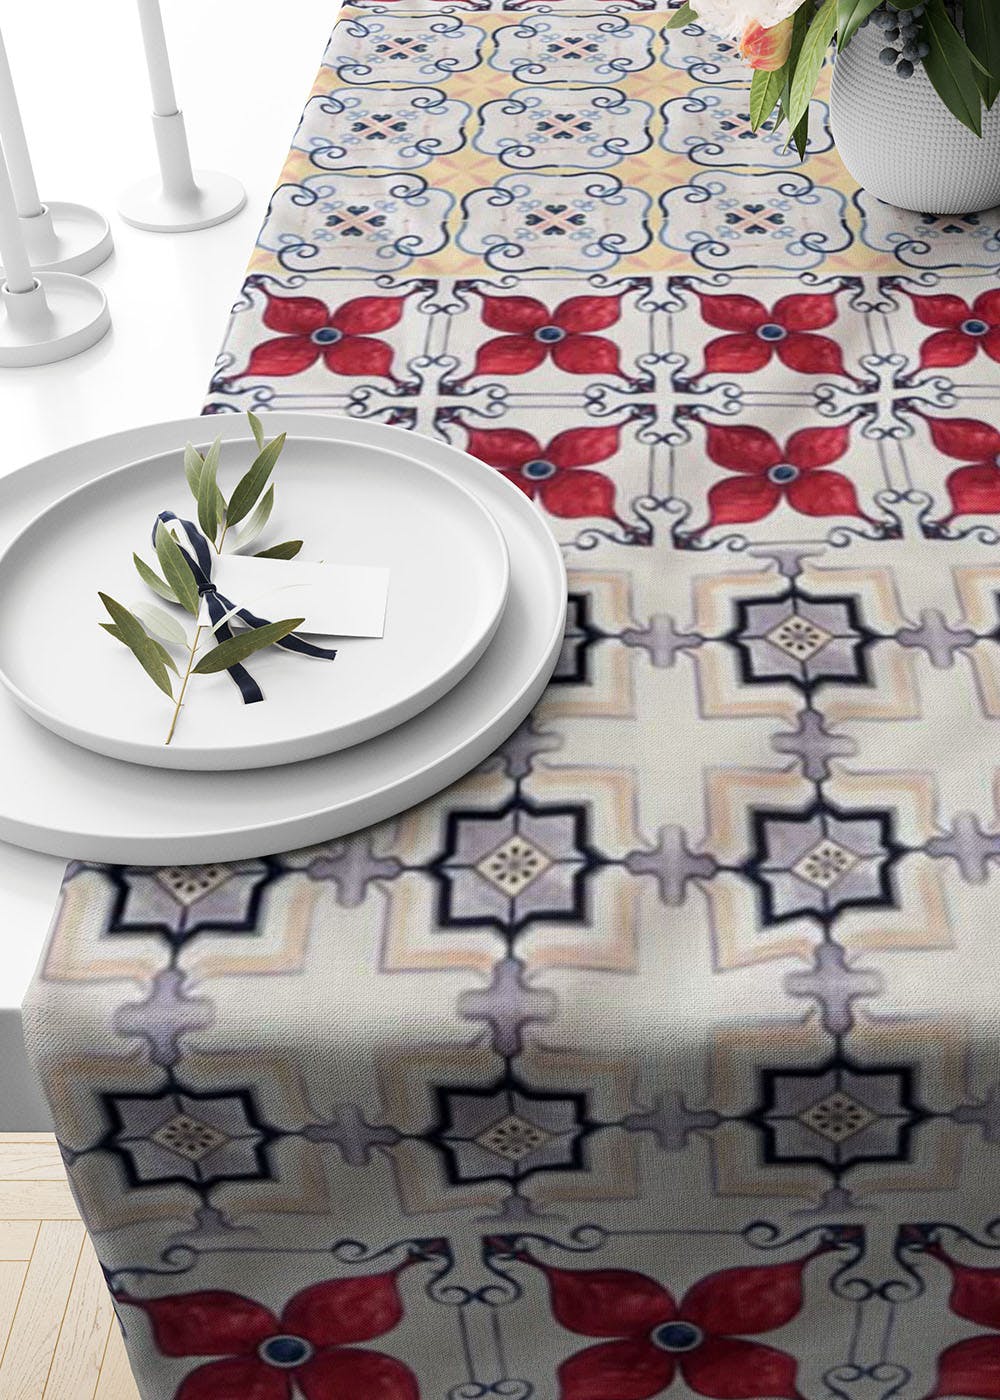 Geometric style handloom fabric placemat table mats 2 at ₹750